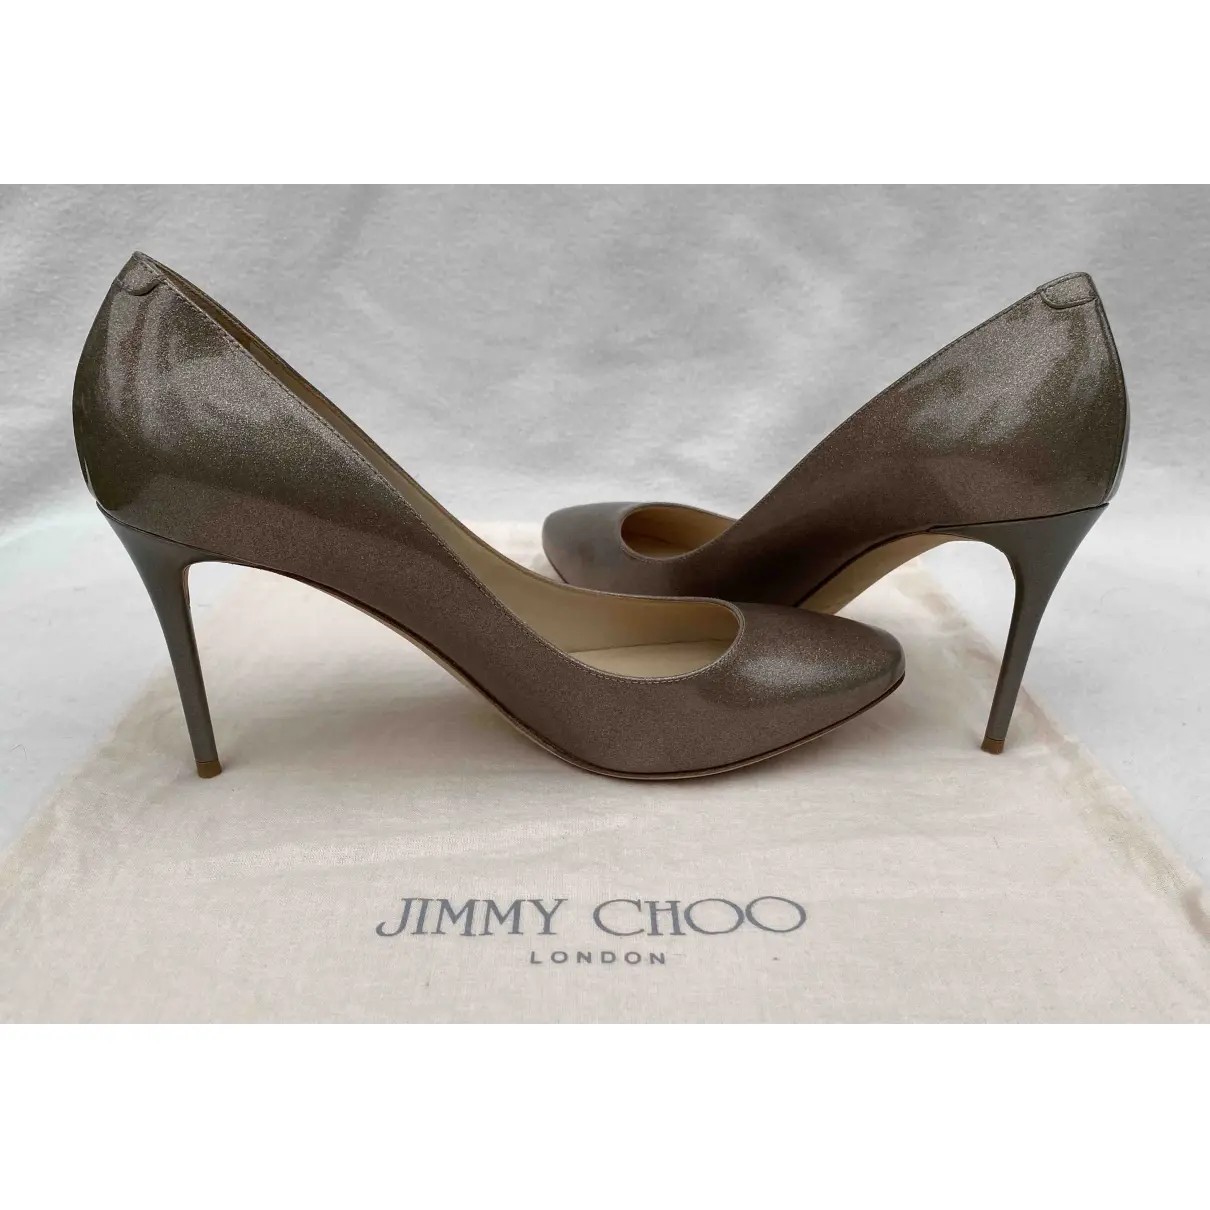 Jimmy Choo Esme patent leather heels for sale